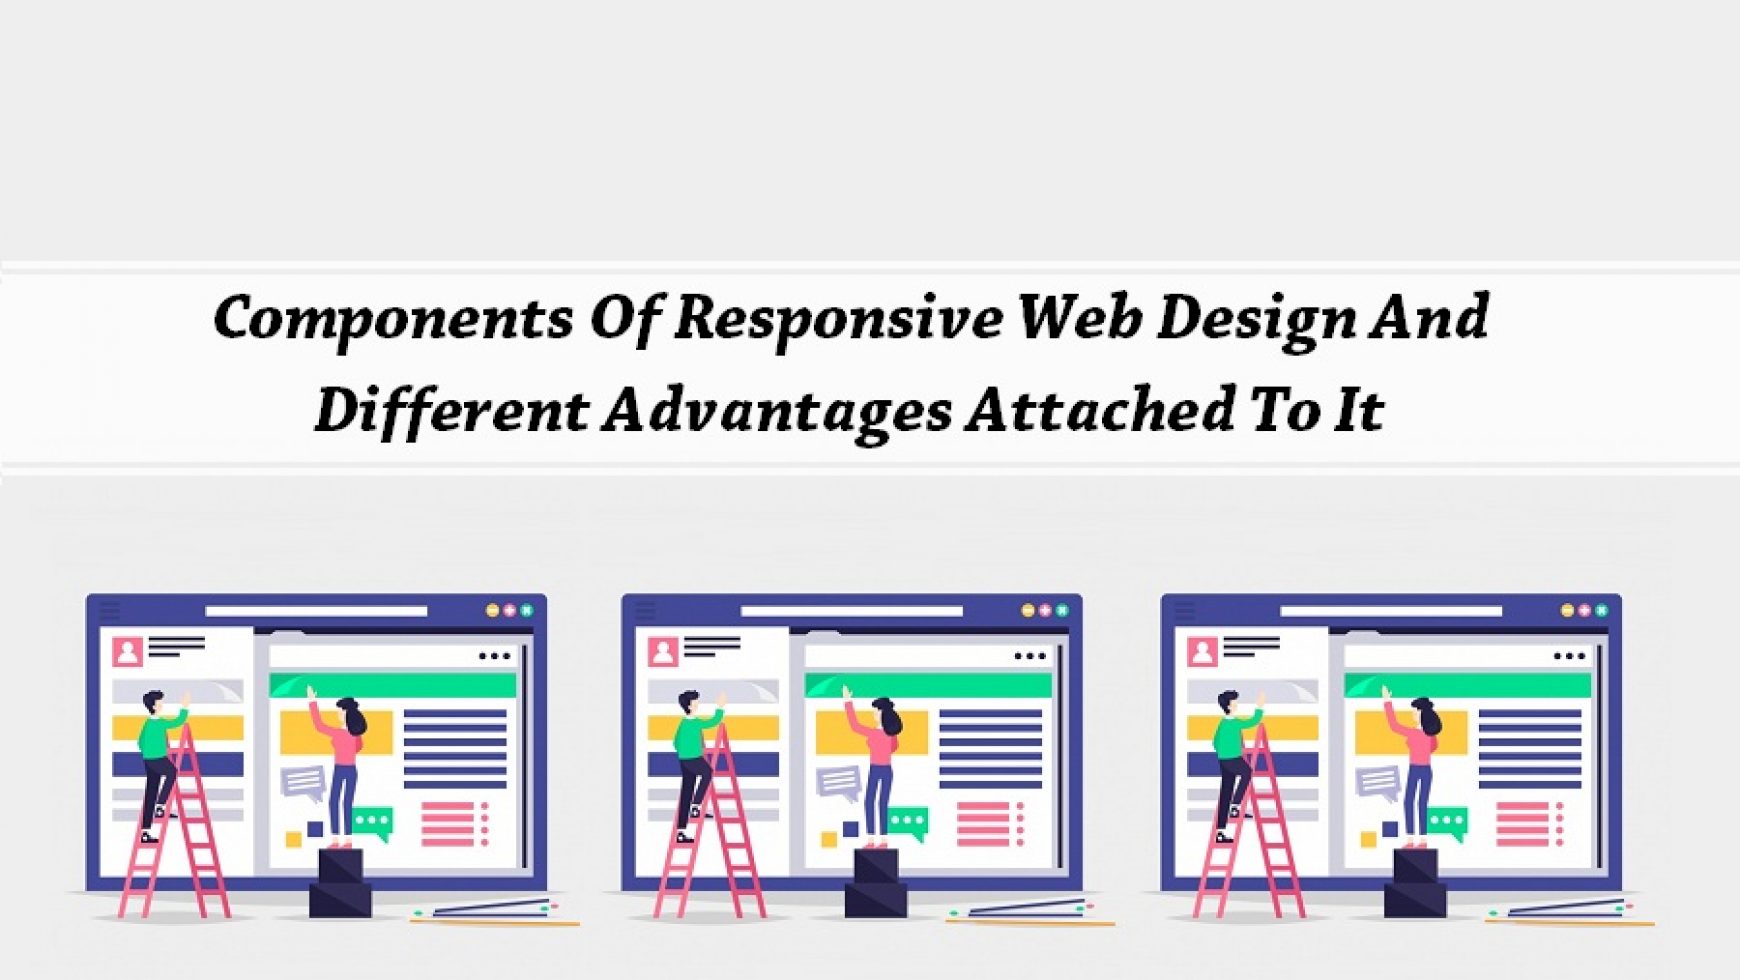 Components Of Responsive Web Design And Different Advantages Attached To It